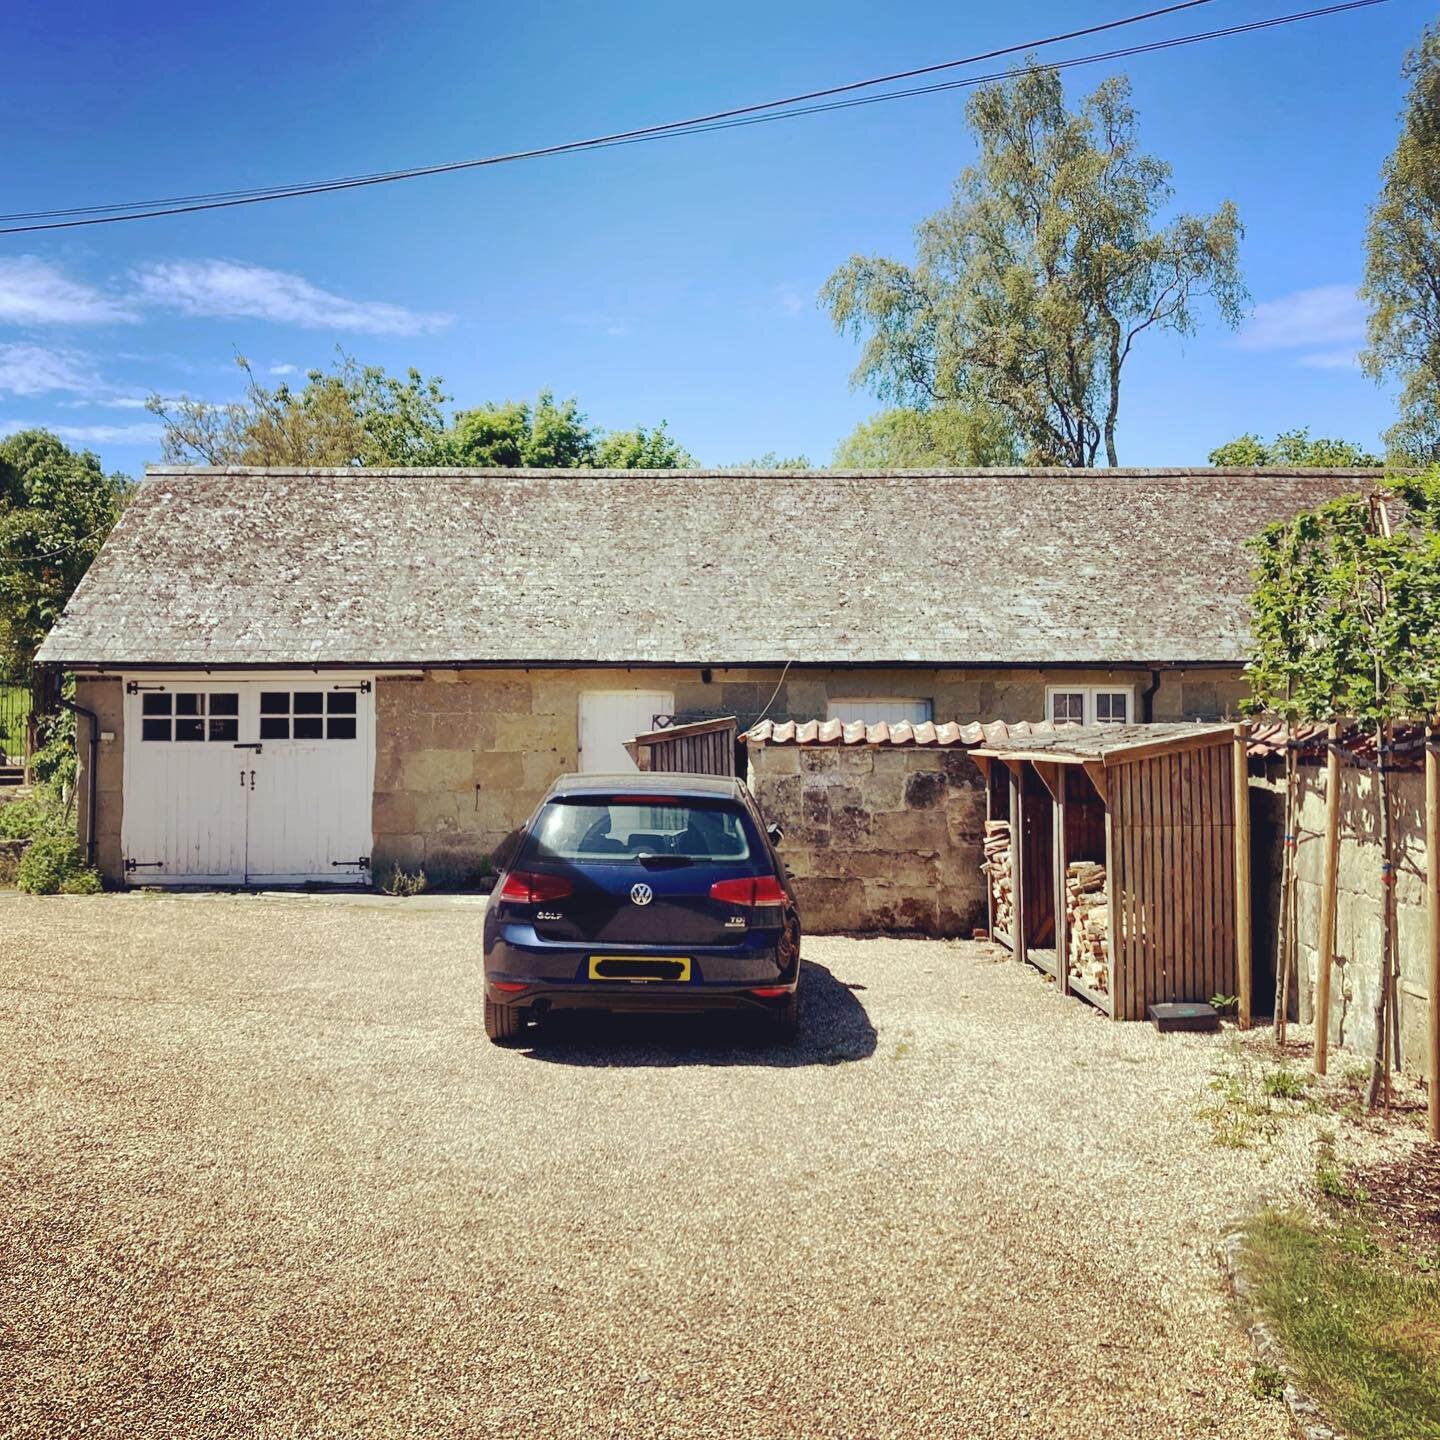 Another 'modest but meaningful' Consent has now come through to extend / convert this Conservation Area barn near Salisbury. ☺️

#autometry_ltd #barnconversion #grannyannex